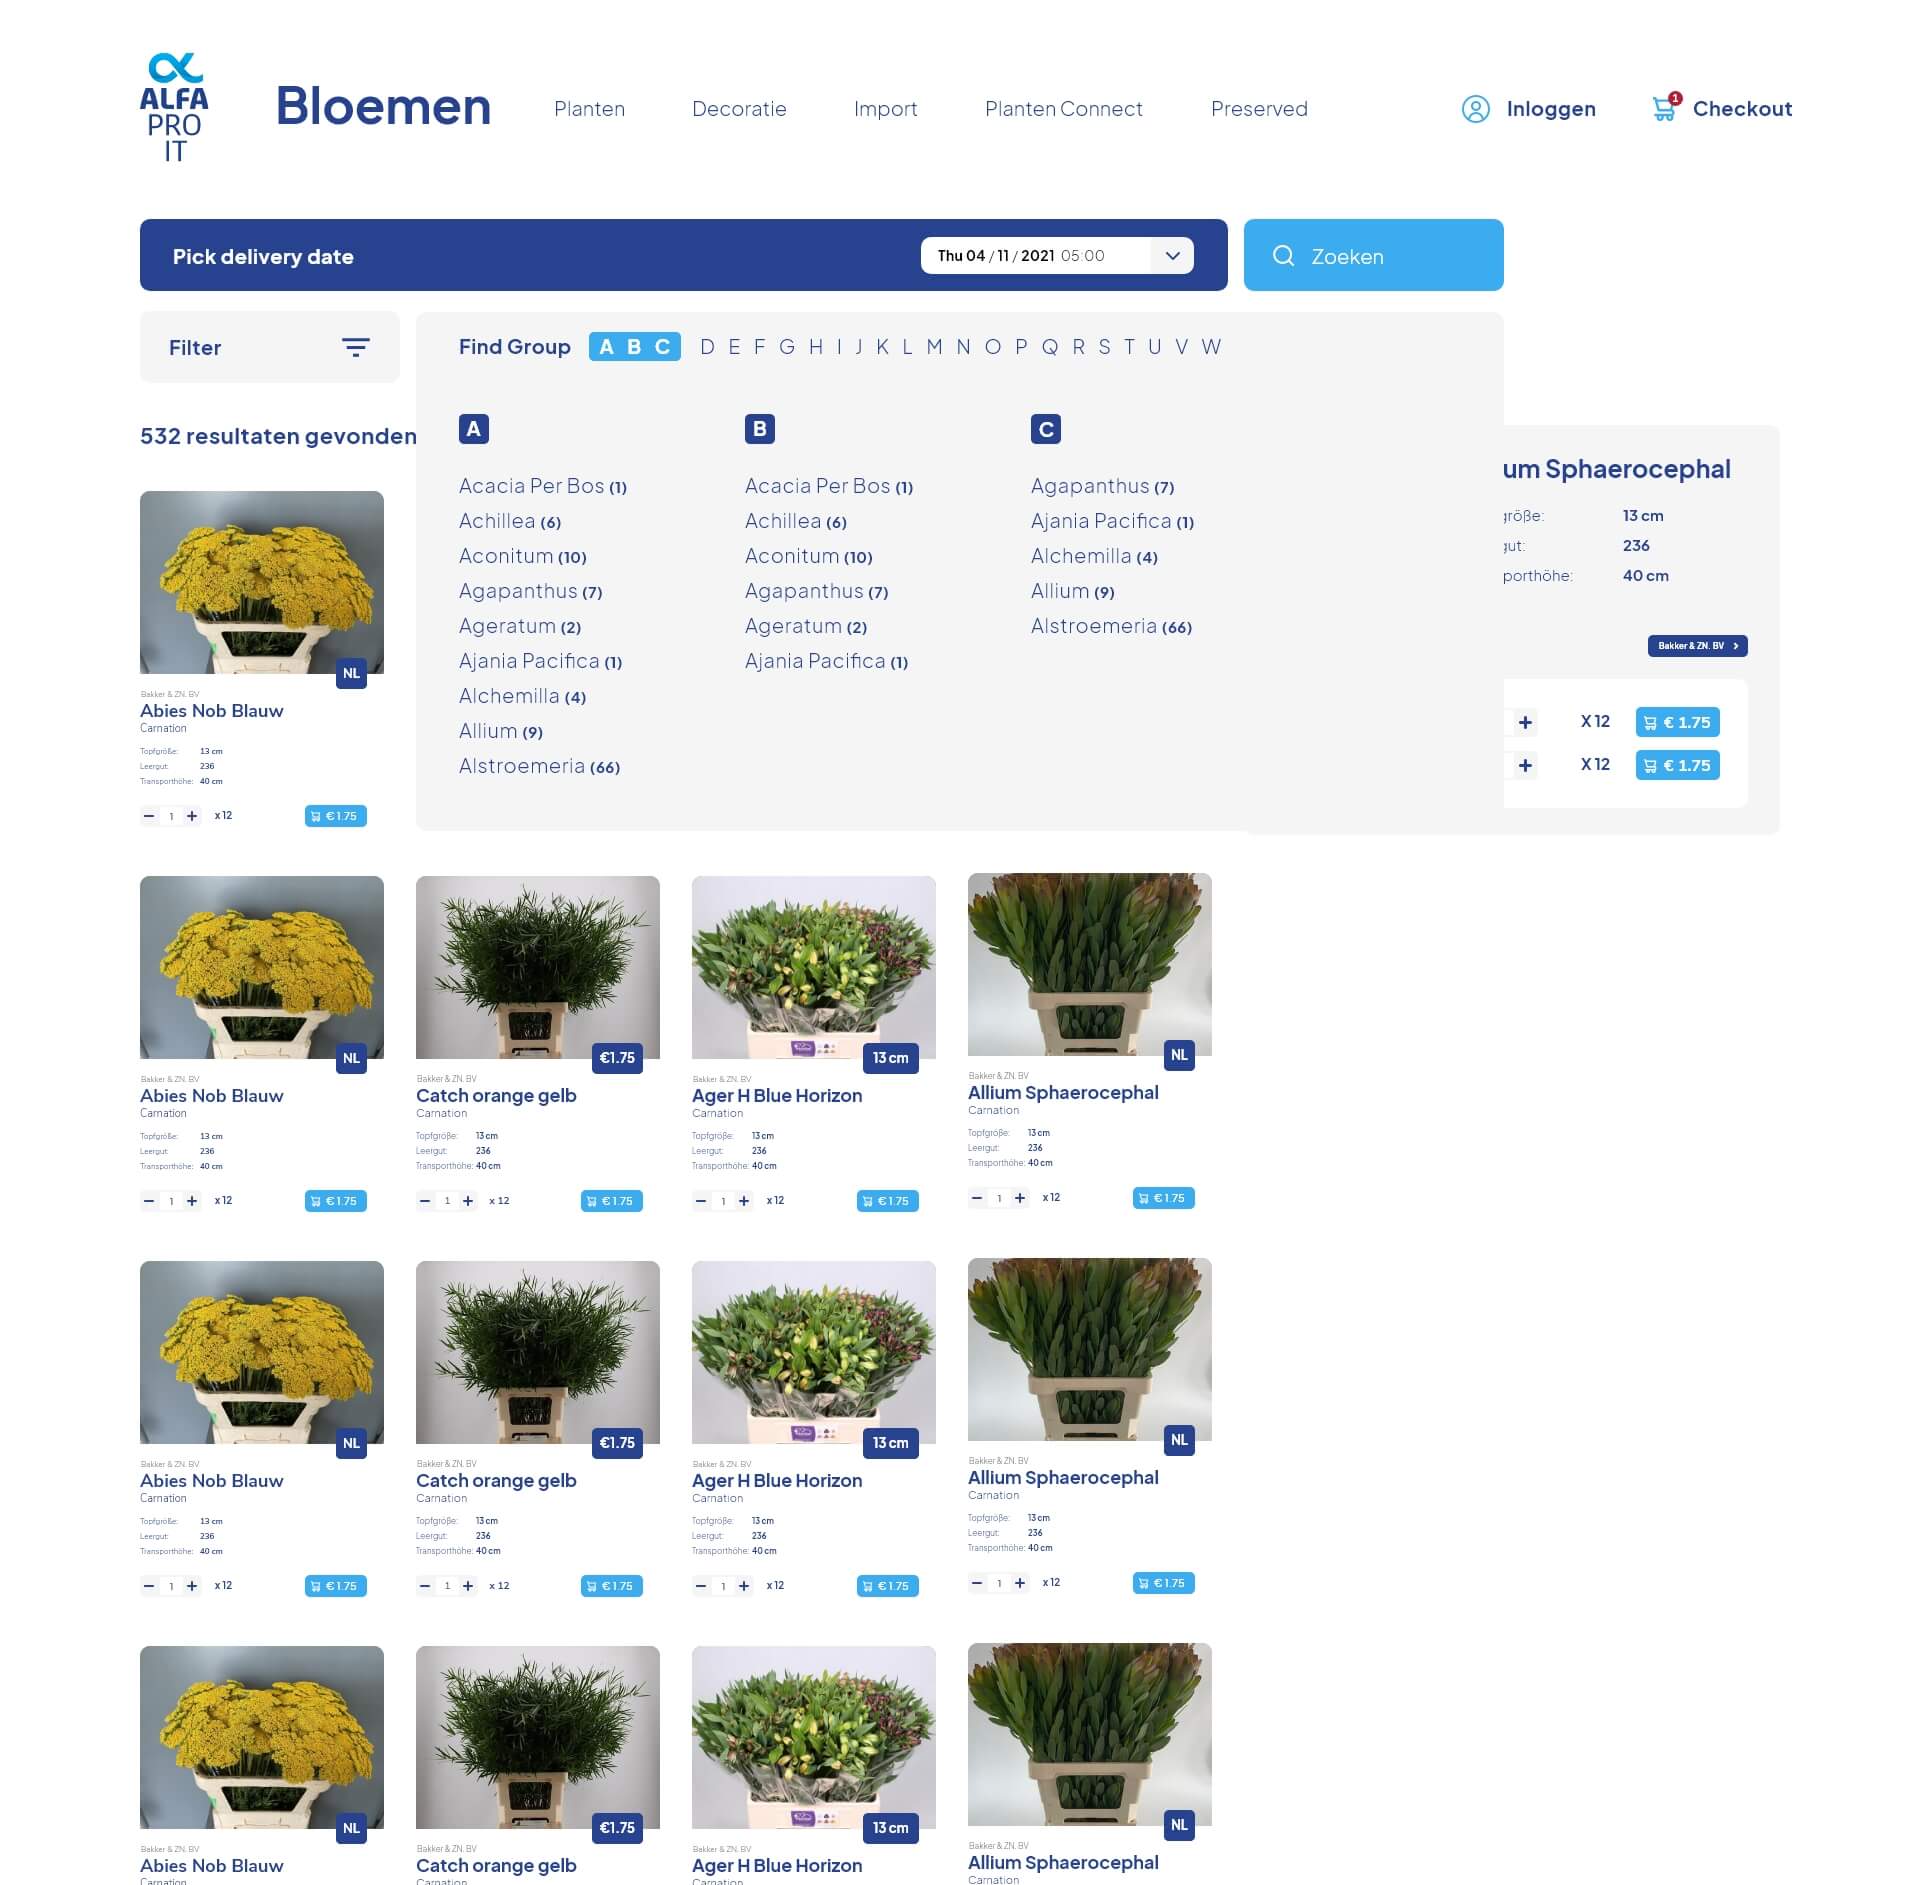 Online flower shop interface displaying various types of flowers for sale including Abies Nobilis, Agapanthus, Allium, and more with prices and minimalistic design.